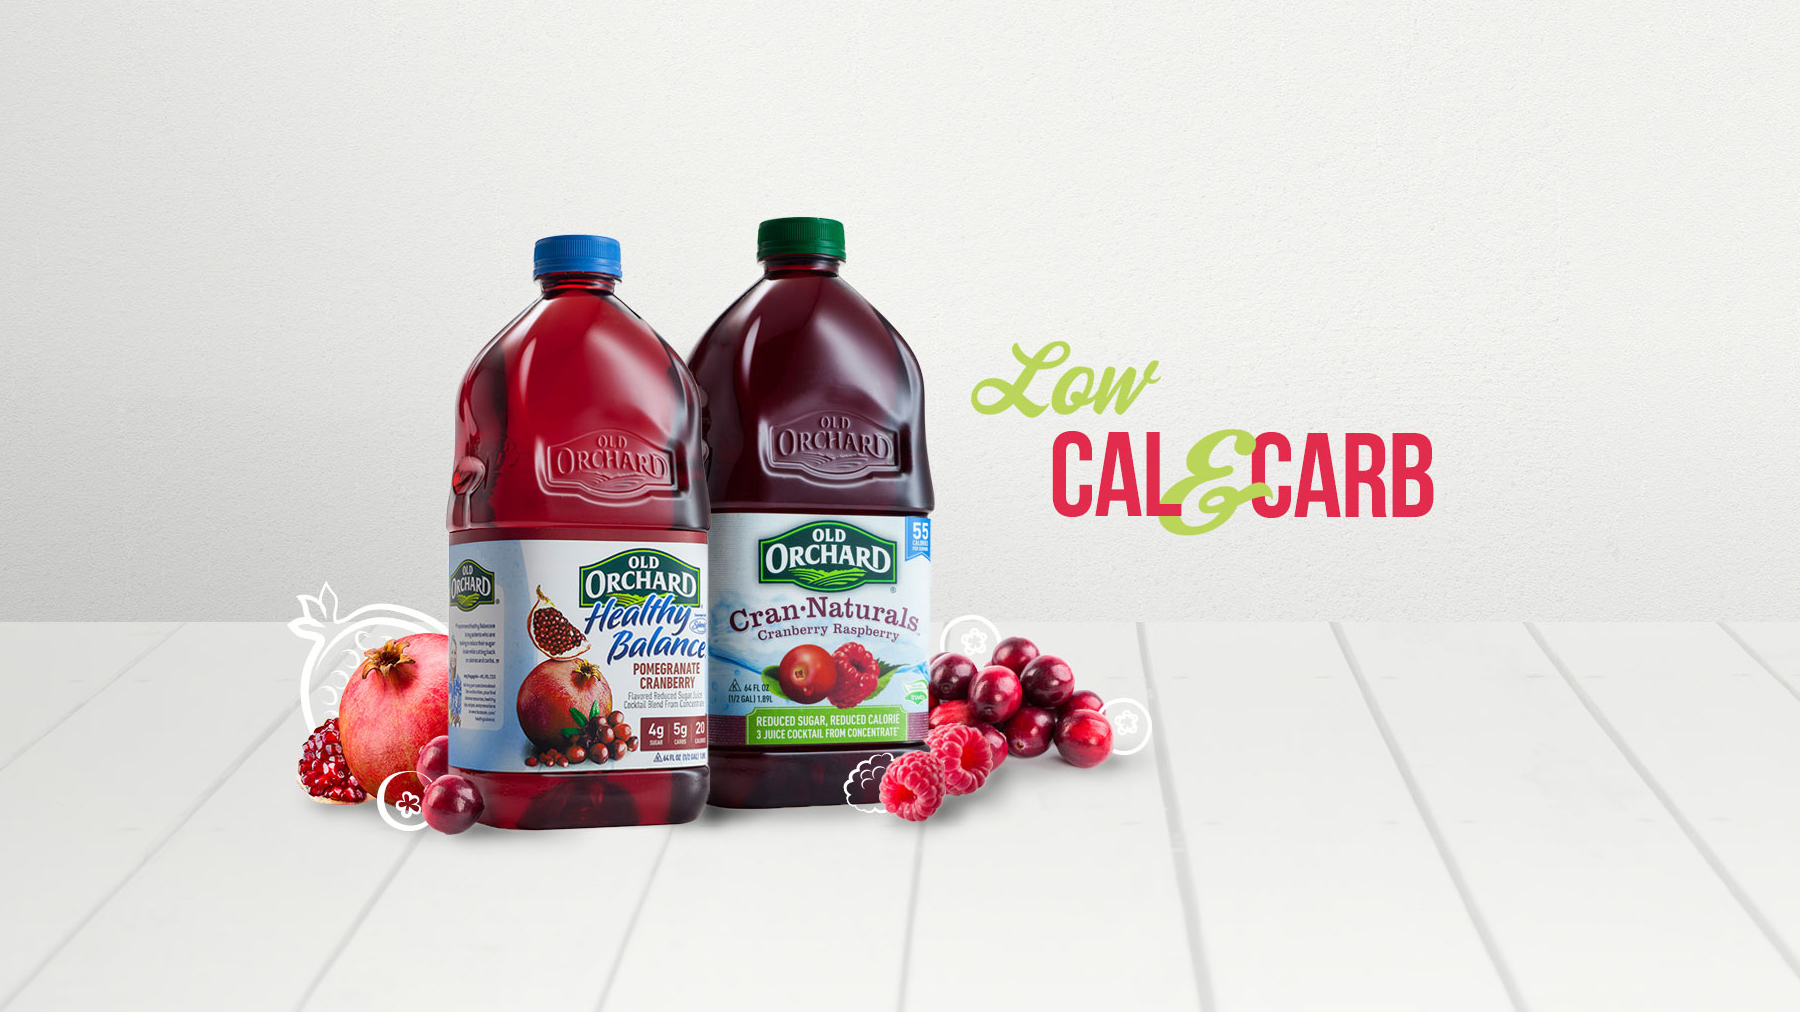 Low Cal & Low Carb | Old Orchard Brands